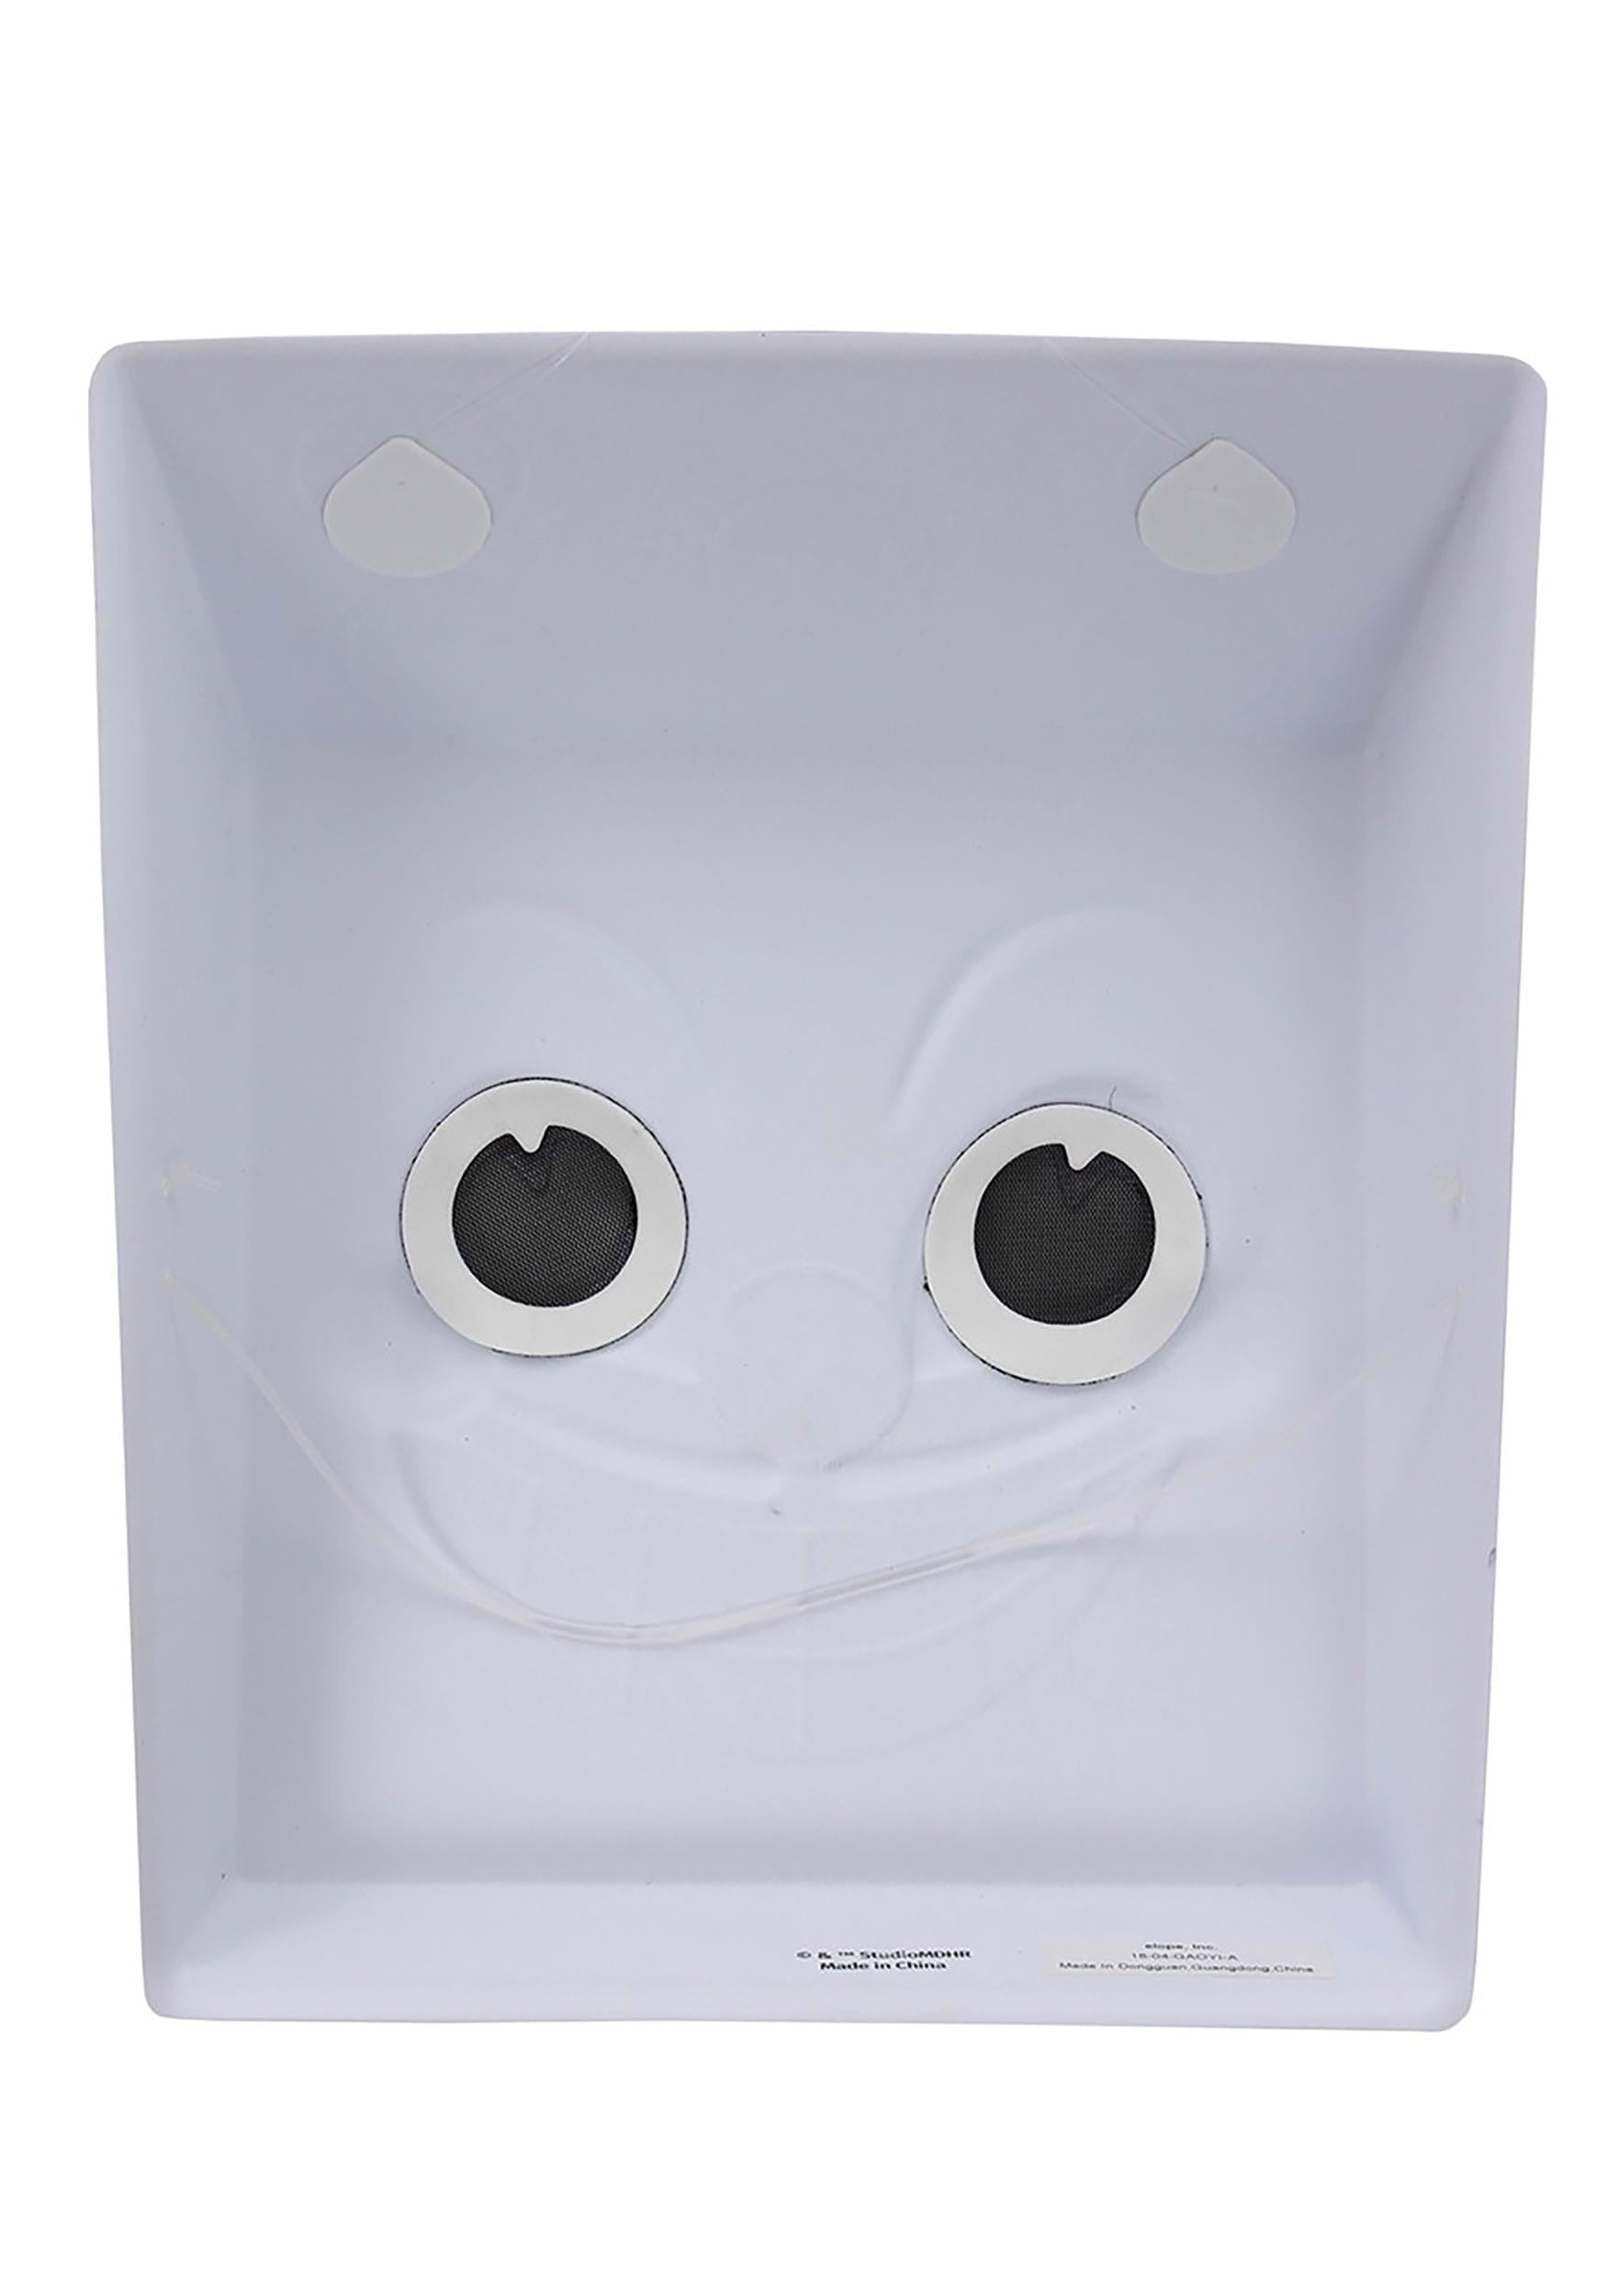 Cup Head  King Dice Vacuform Mask